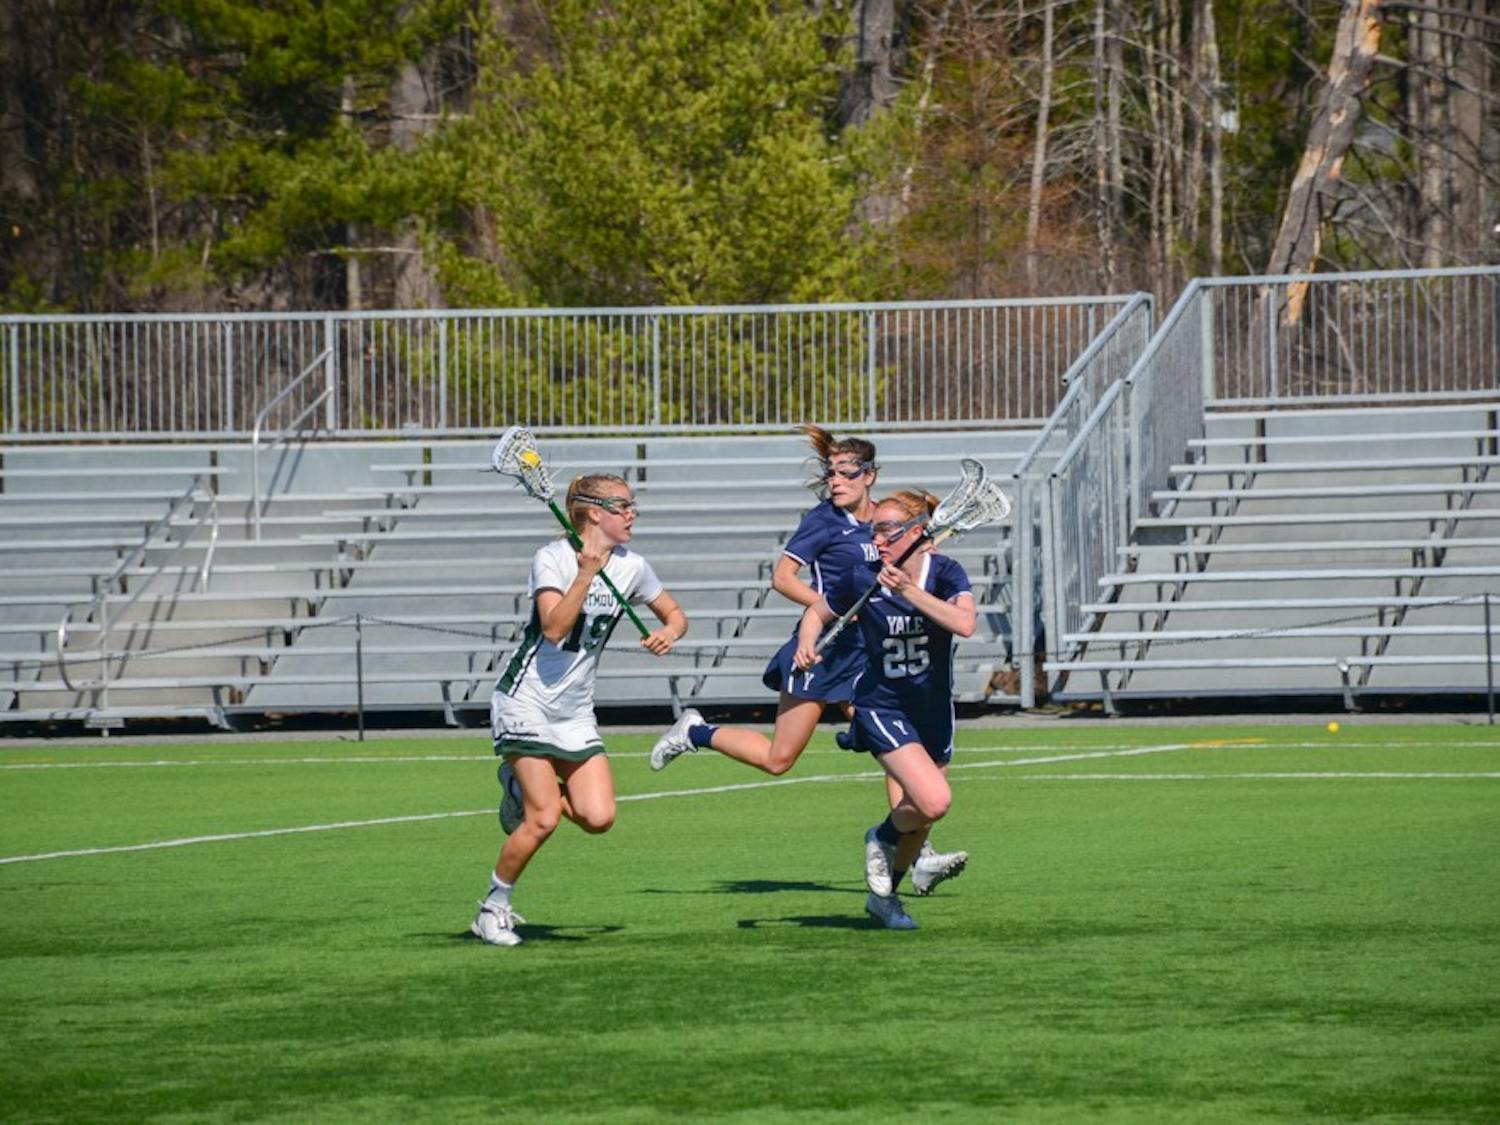 Women’s lacrosse gave Brown University its first Ivy win this past weekend.